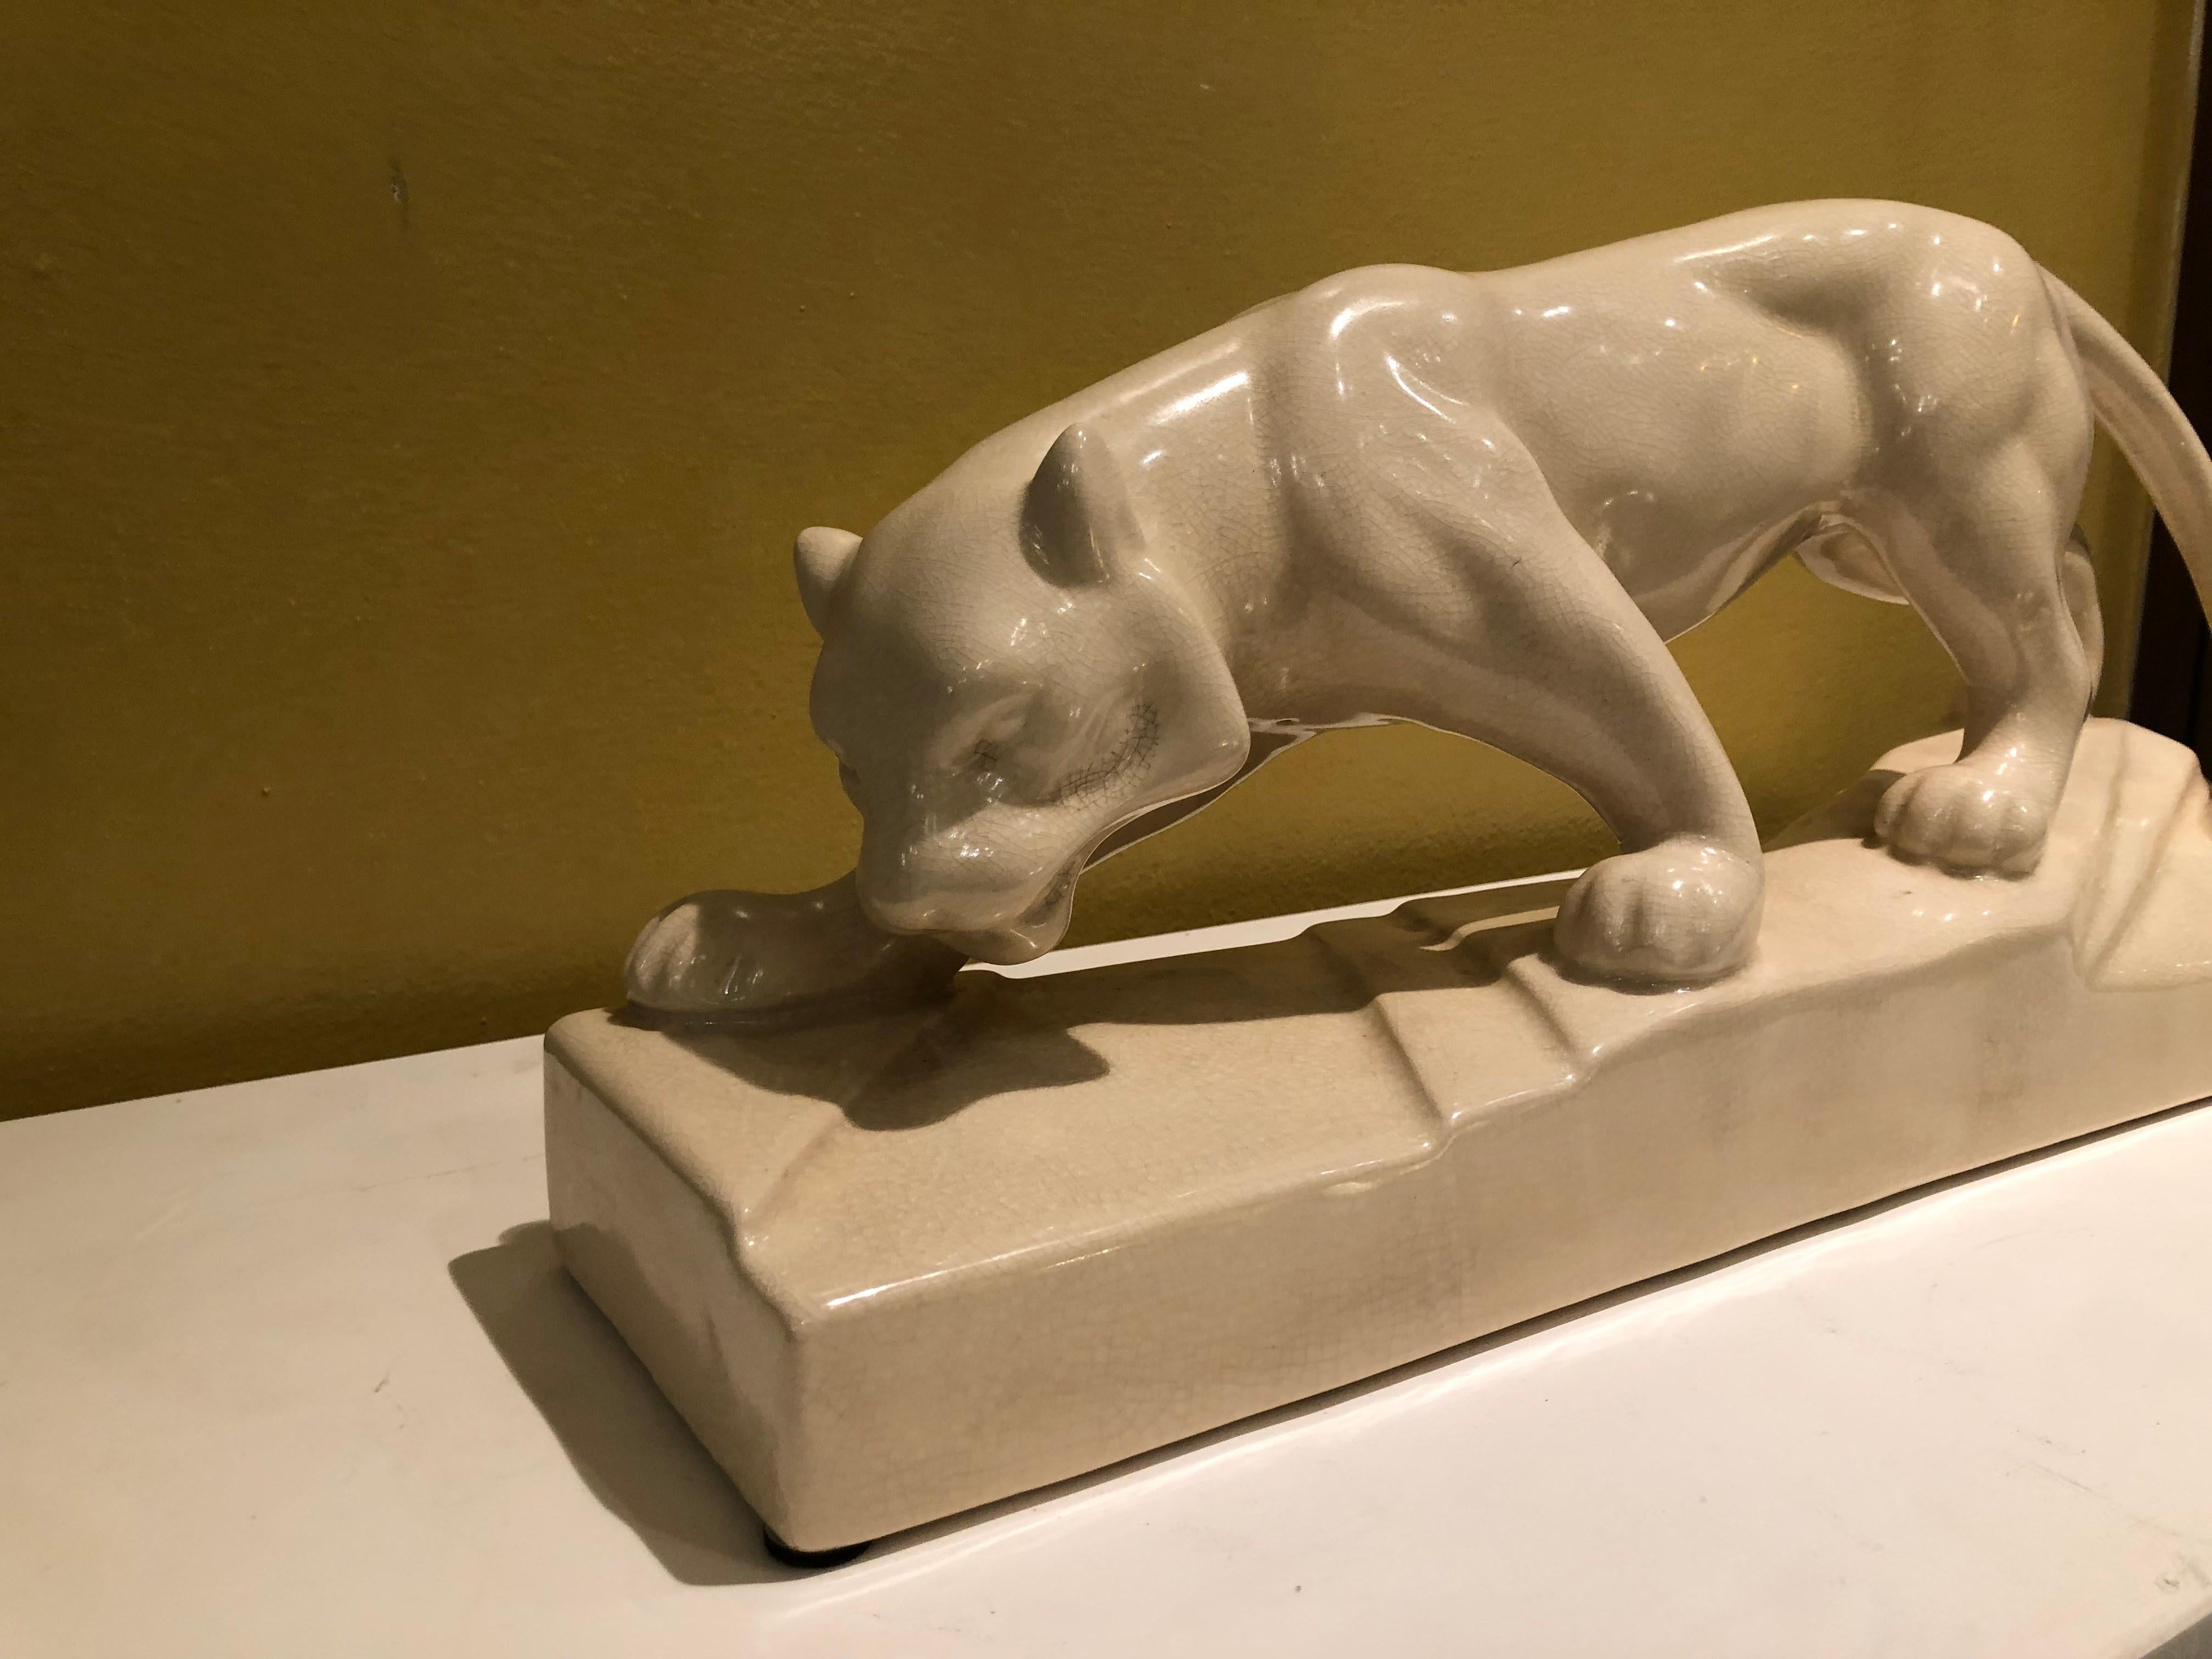 Ivory white ceramic Art Deco sculpture depicting a panther, France, circa 1930. Excellent conditions. A video is available on request. Measures: W 50 x D 13 x H 25 cm.